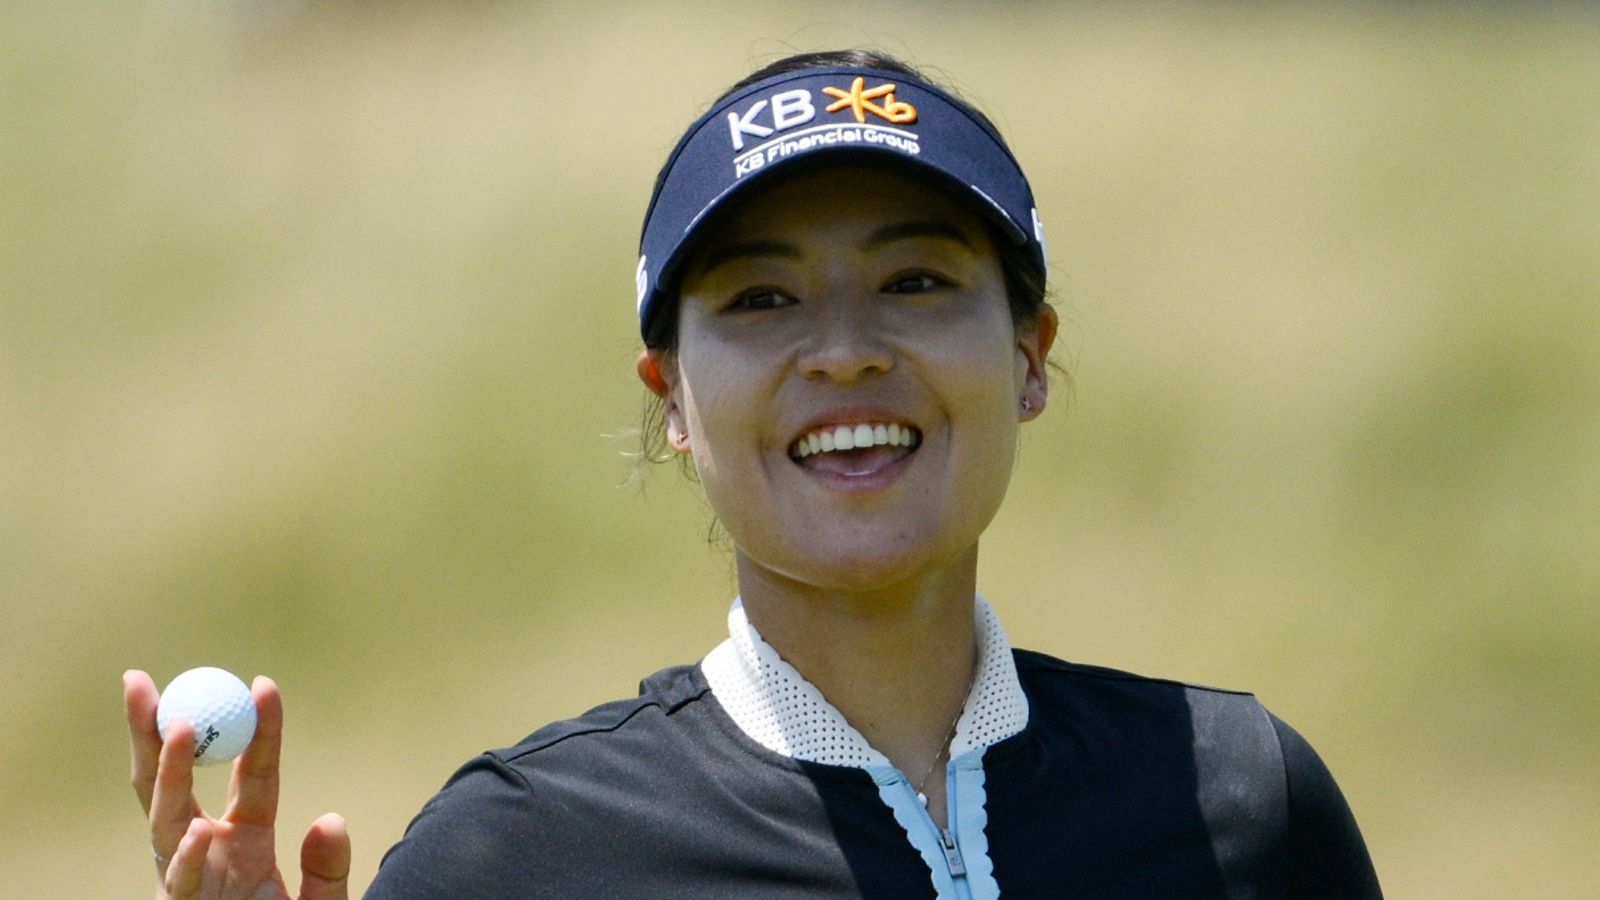 Women’s PGA Championship: In Gee Chun wins title at Congressional Country Club after late Lexi Thompson collapse